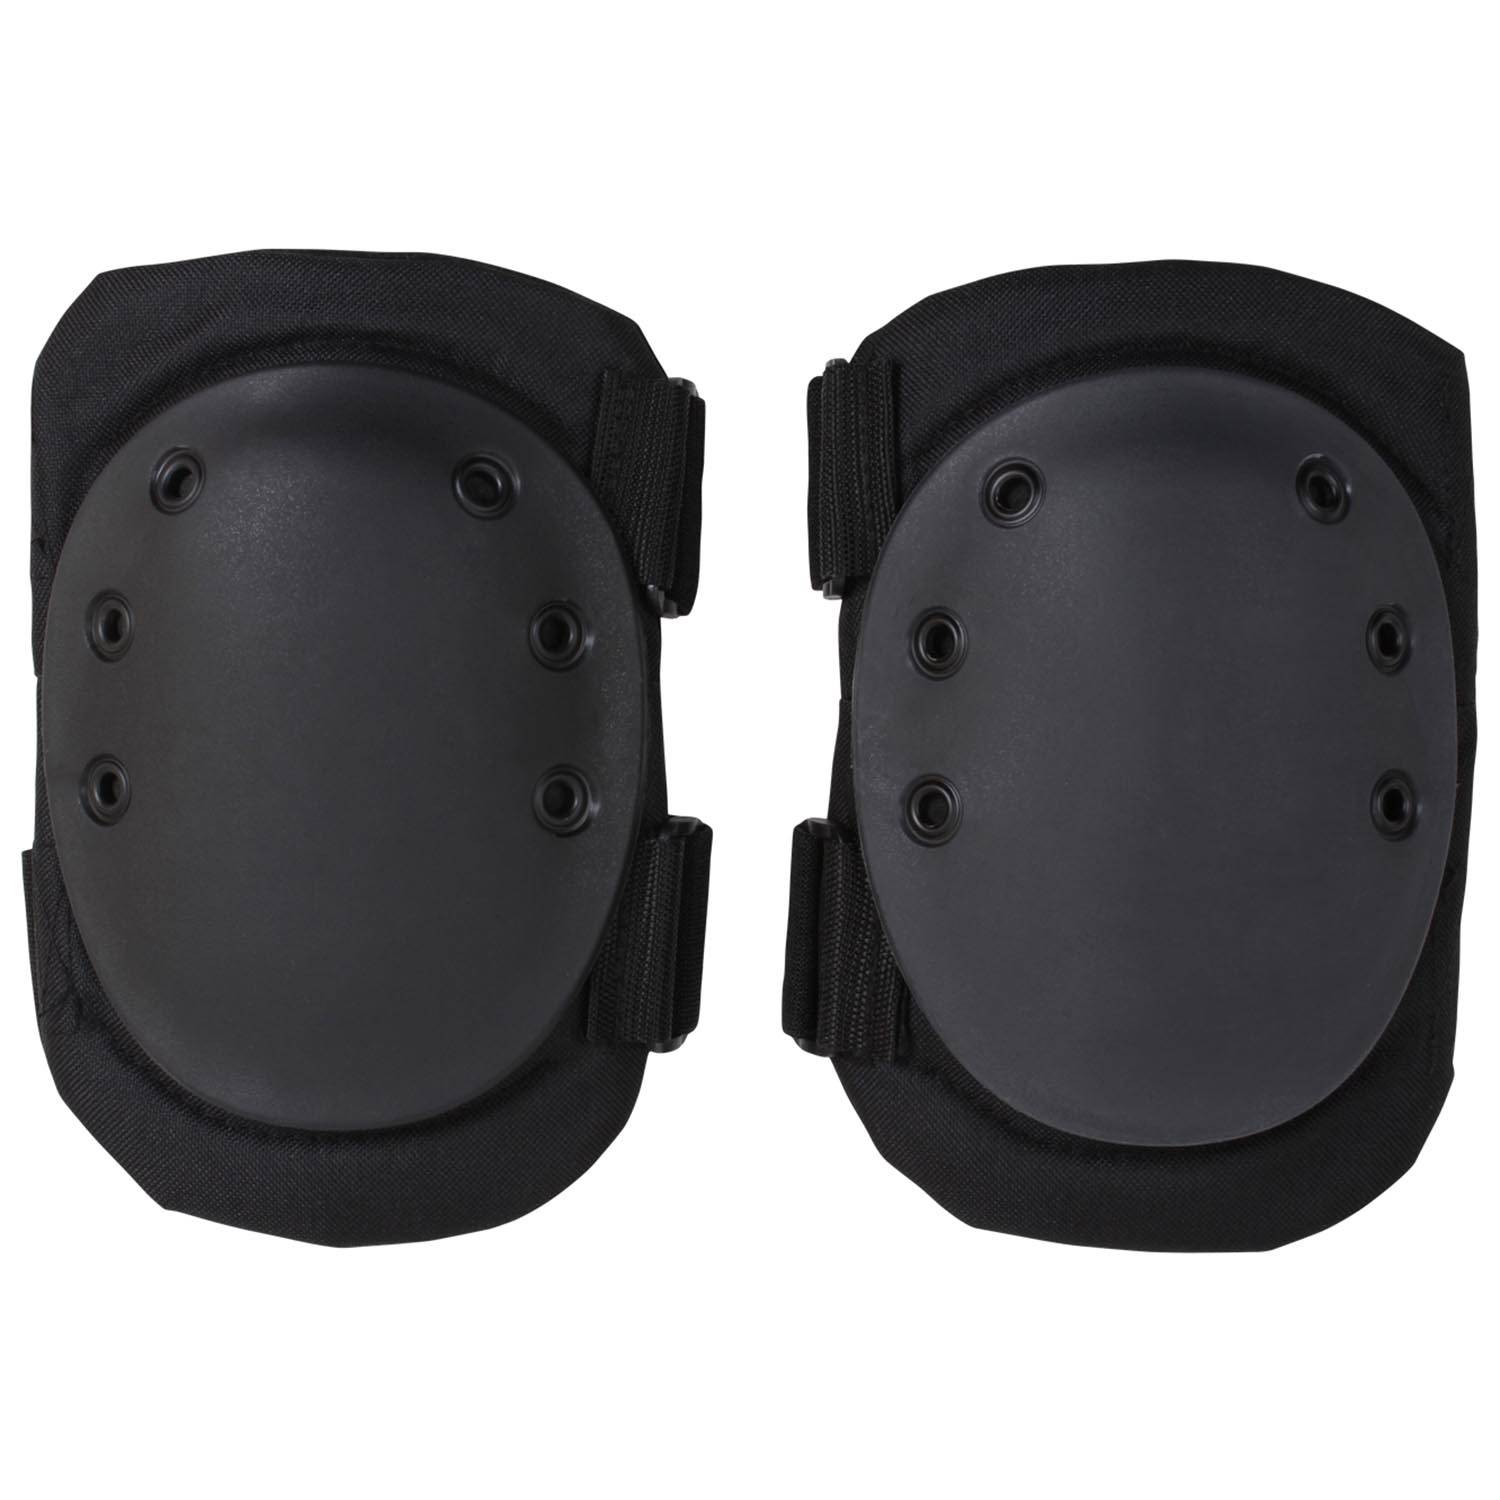 ROTHCO TACTICAL PROTECTIVE GEAR KNEE PADS